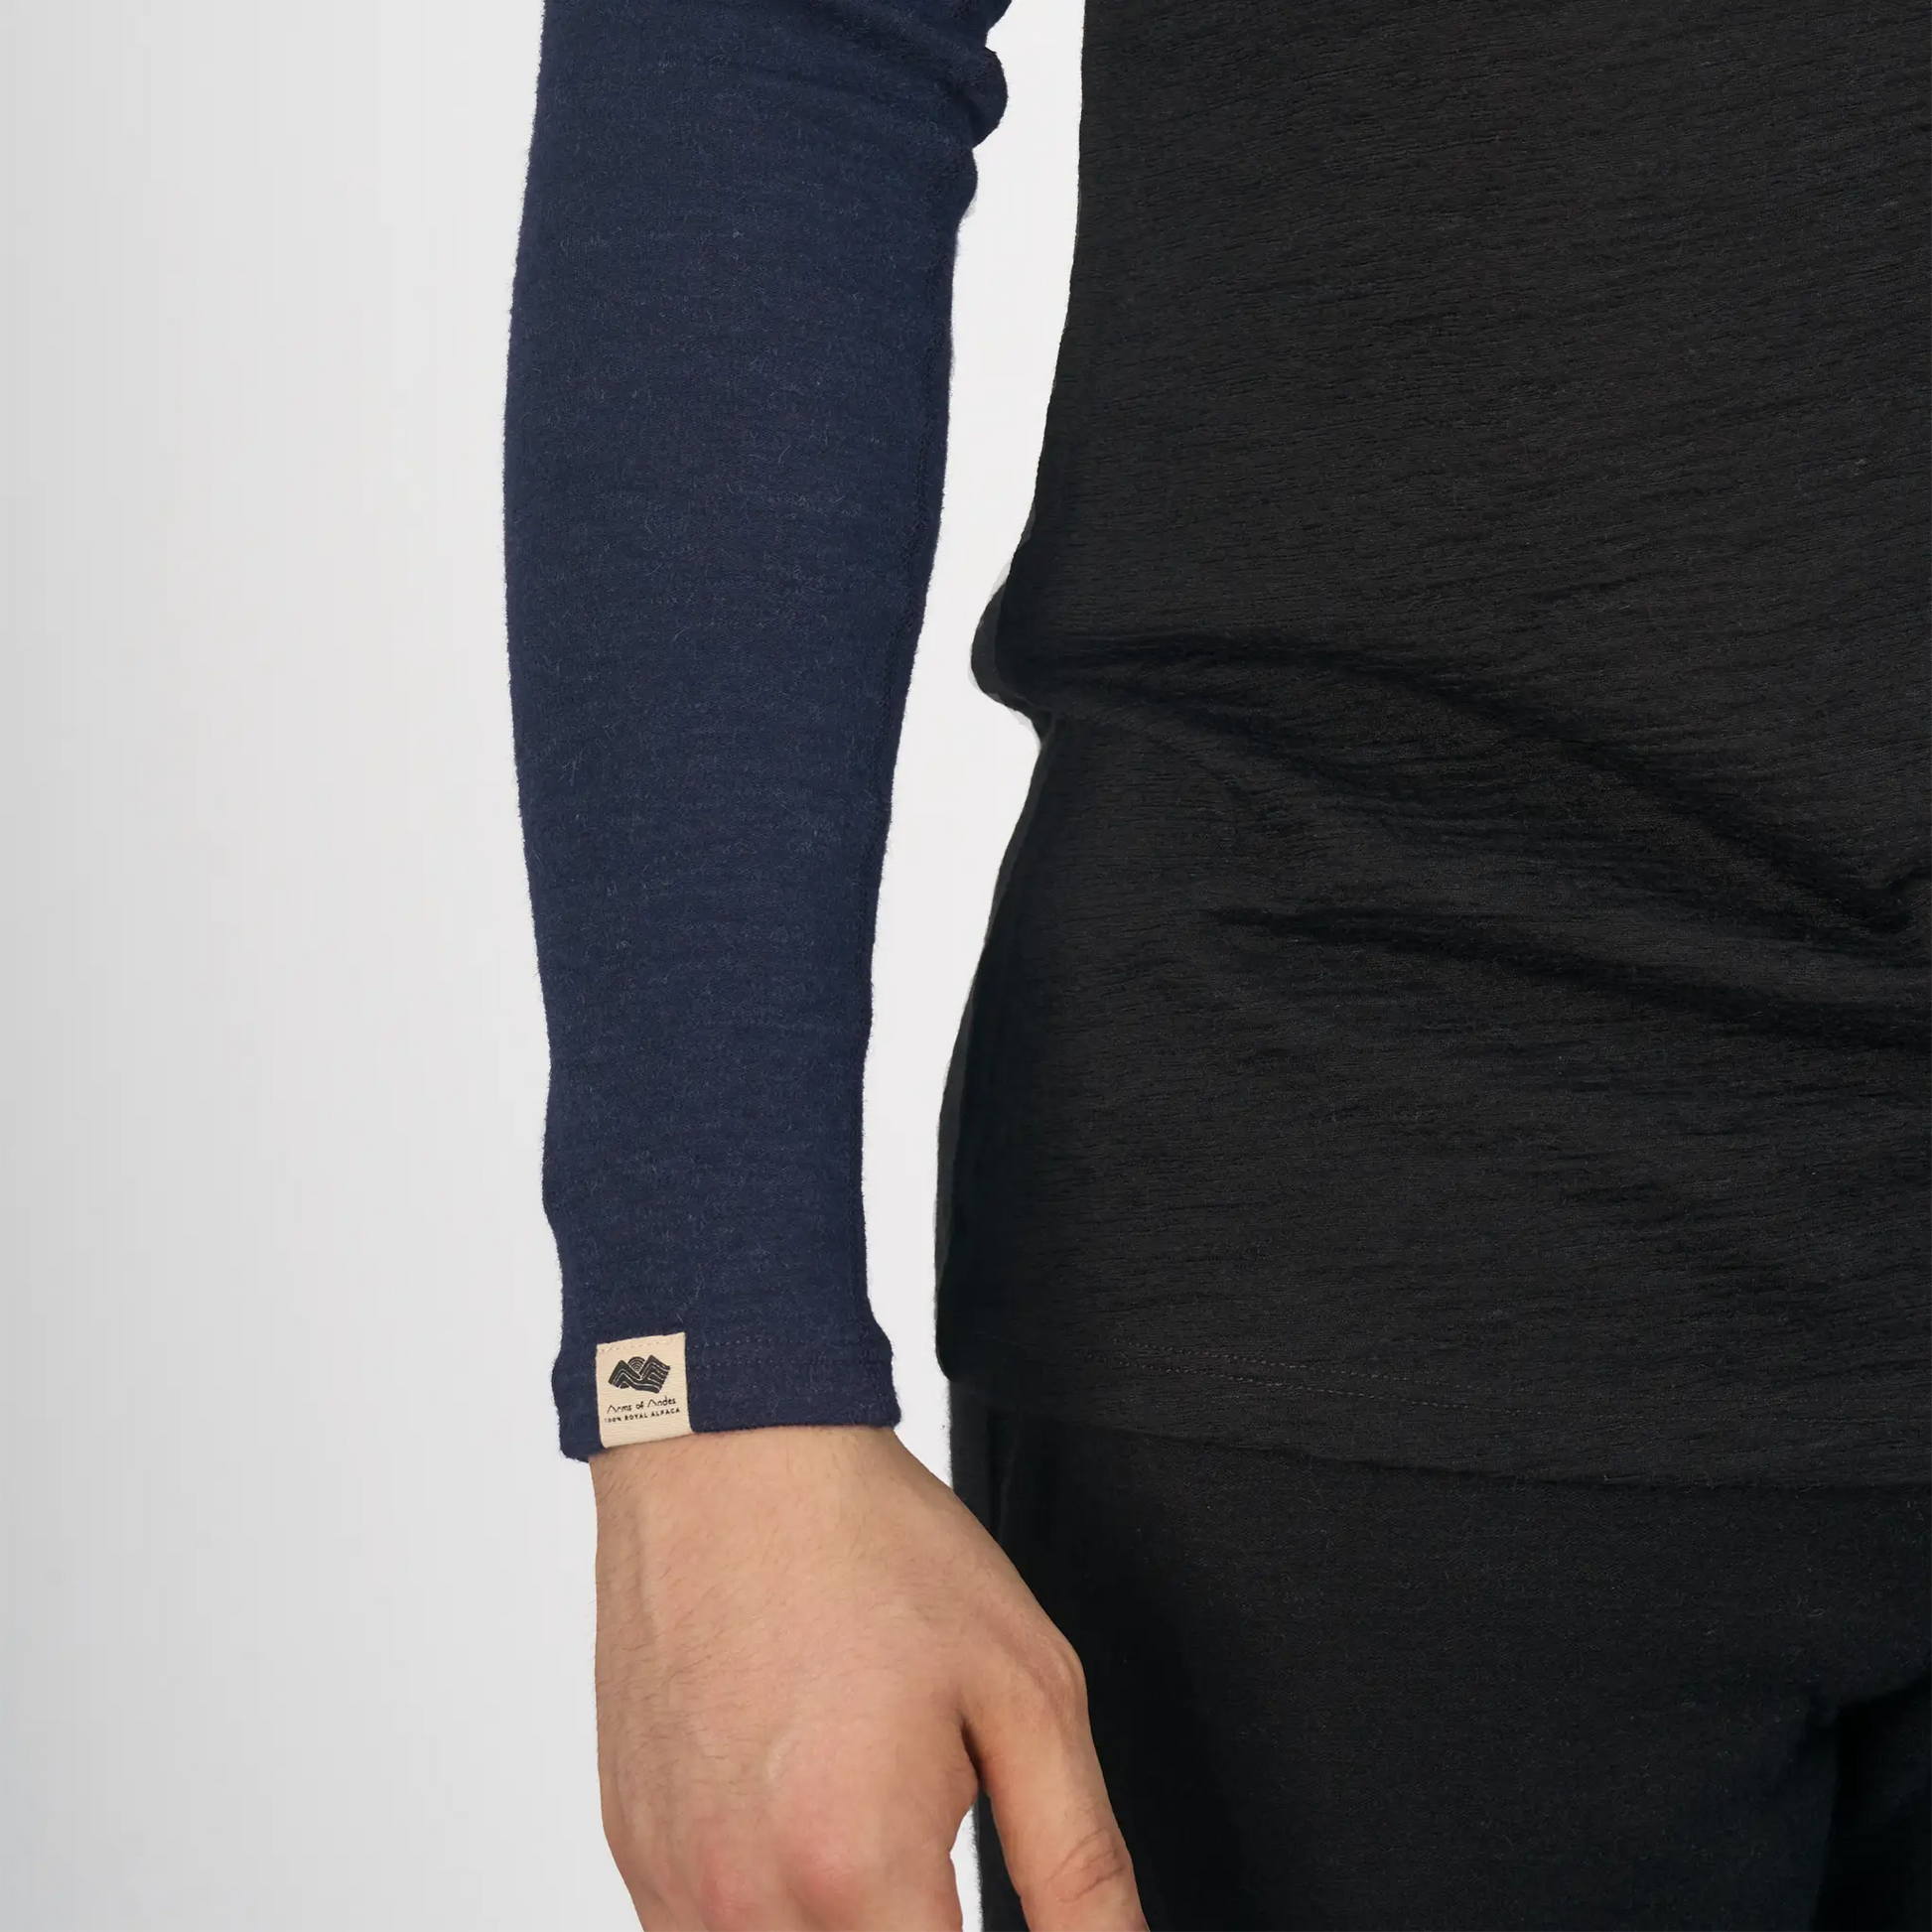 mens moisture wicking sleeve midweight color natural blue